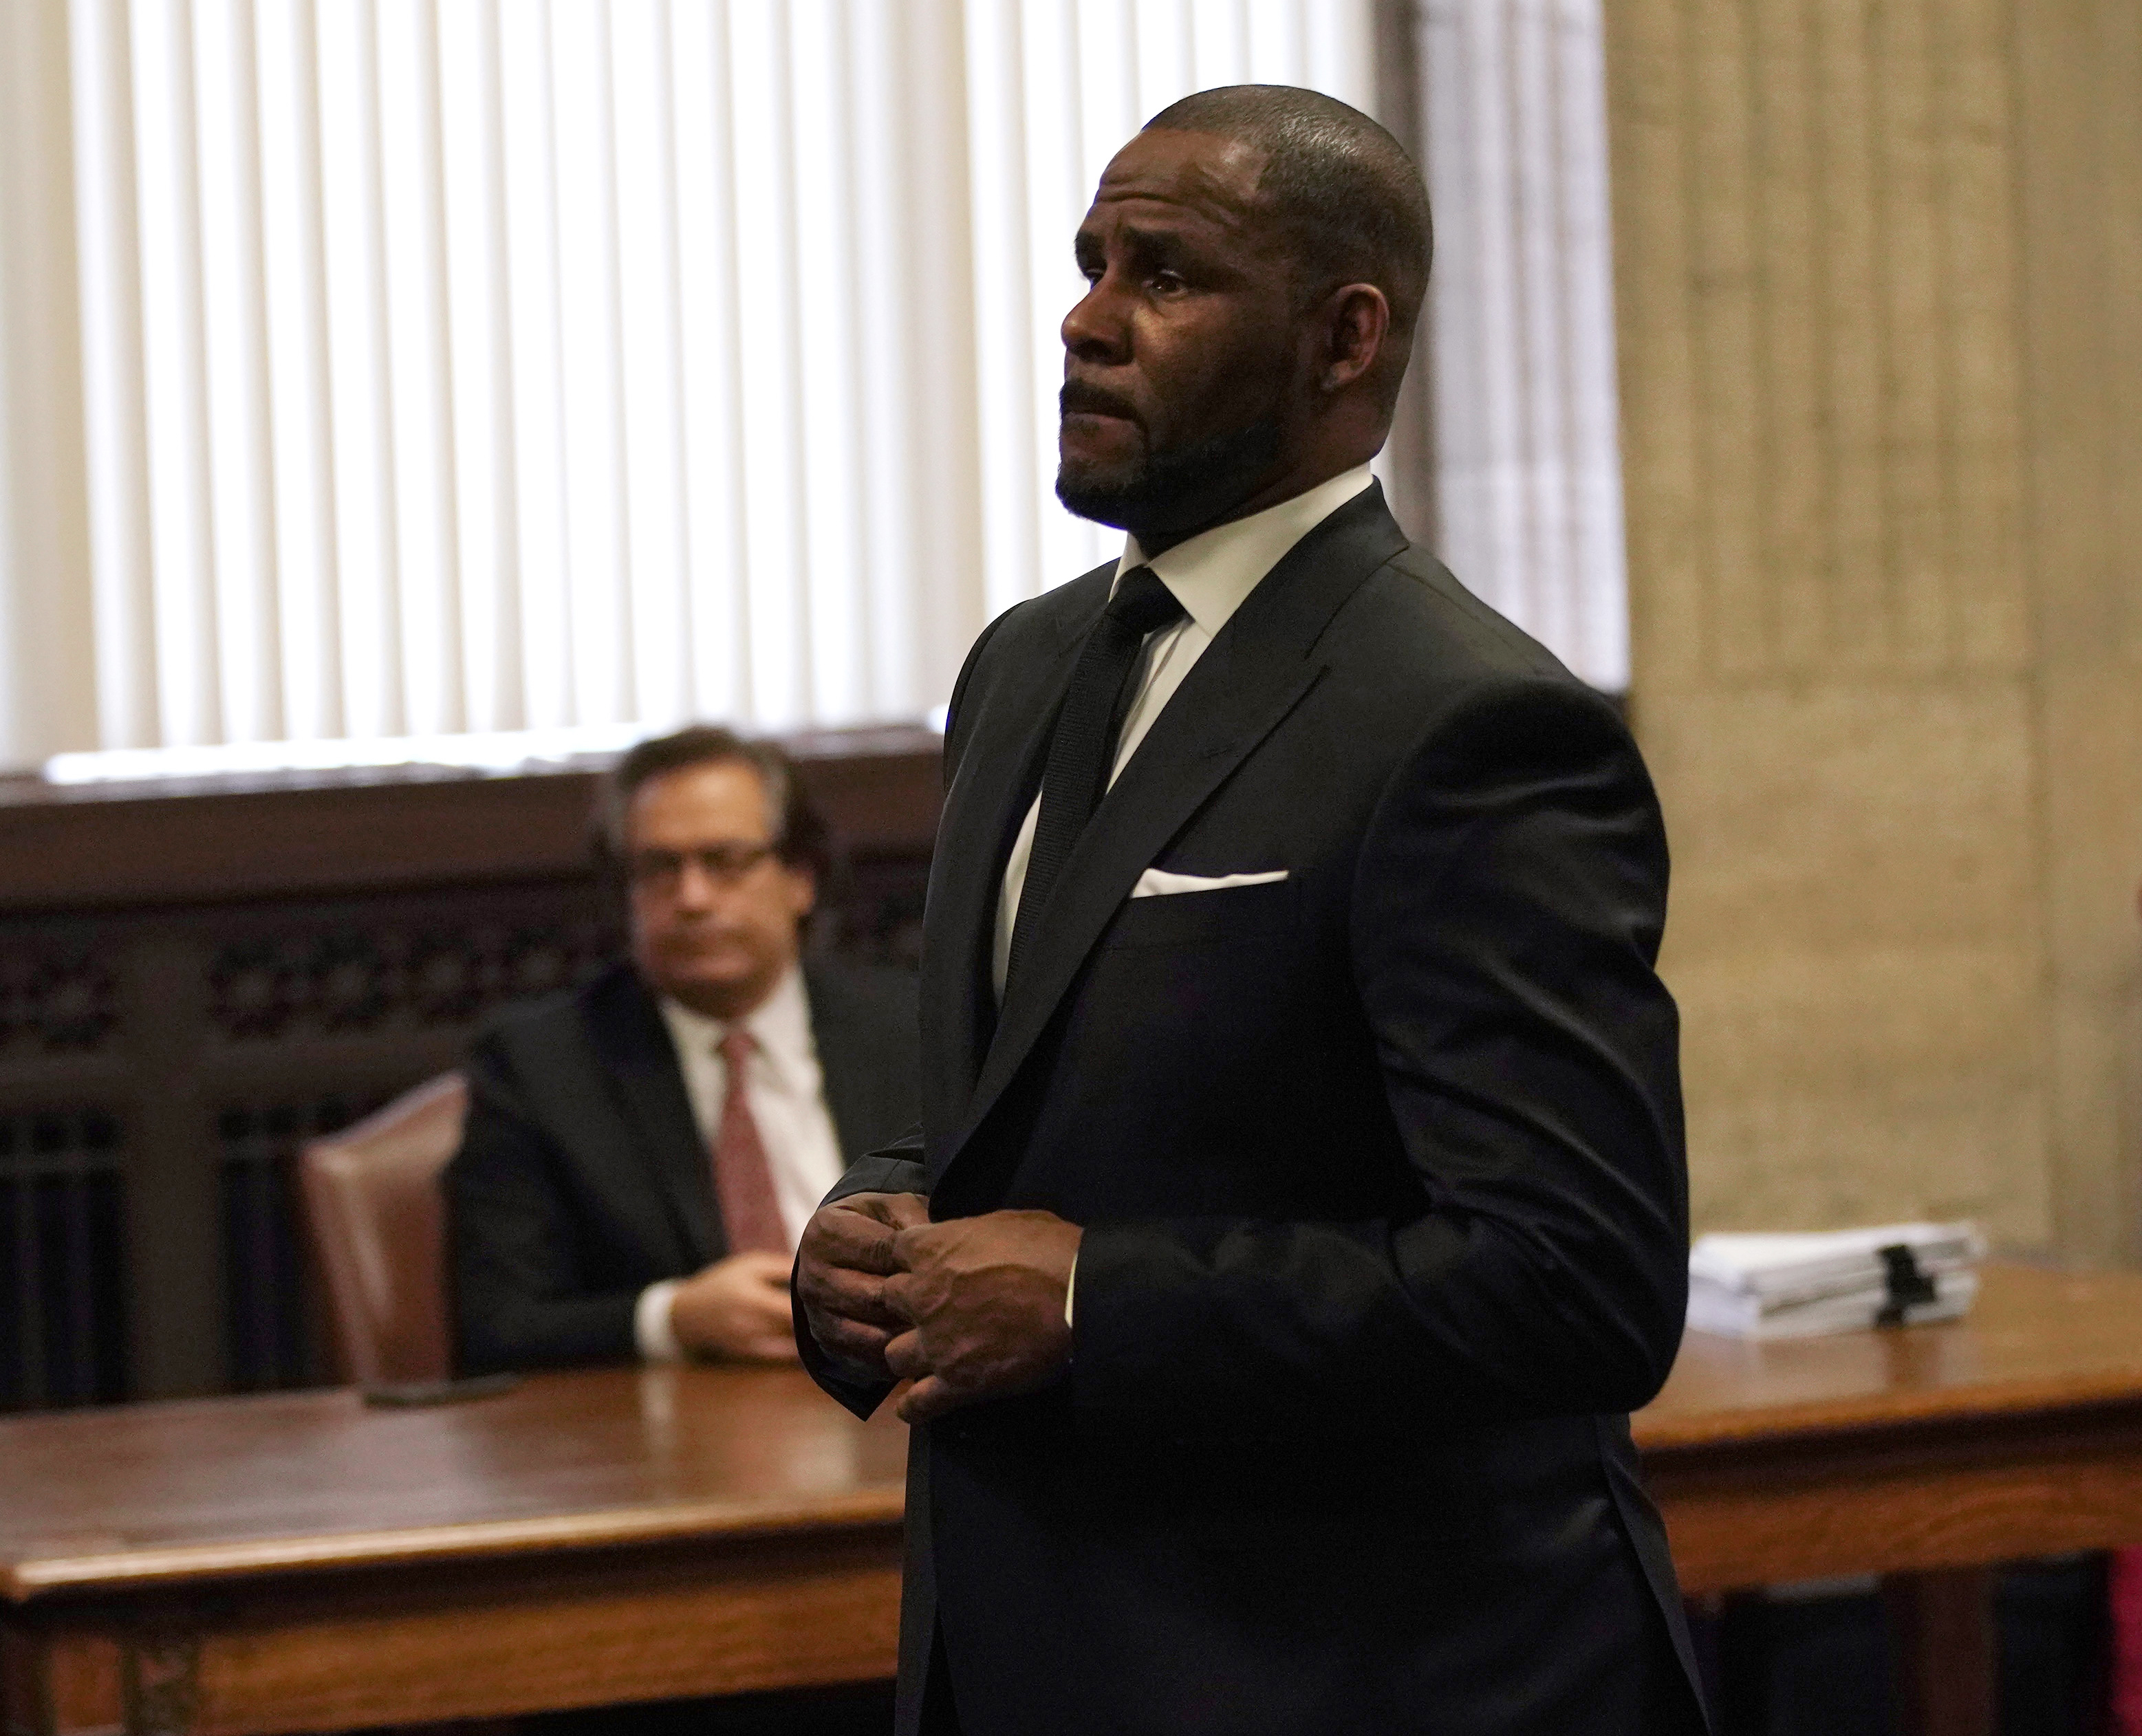 Singer R. Kelly appears in court for a hearing to request that he be allowed to travel to Dubai at the Leighton Criminal Court Building on March 22, 2019 in Chicago, Illinois. R. Kelly appeared before a judge to request permission to travel to Dubai to perform in concerts. (Photo by E. Jason Wambsgans-Pool/Getty Images)